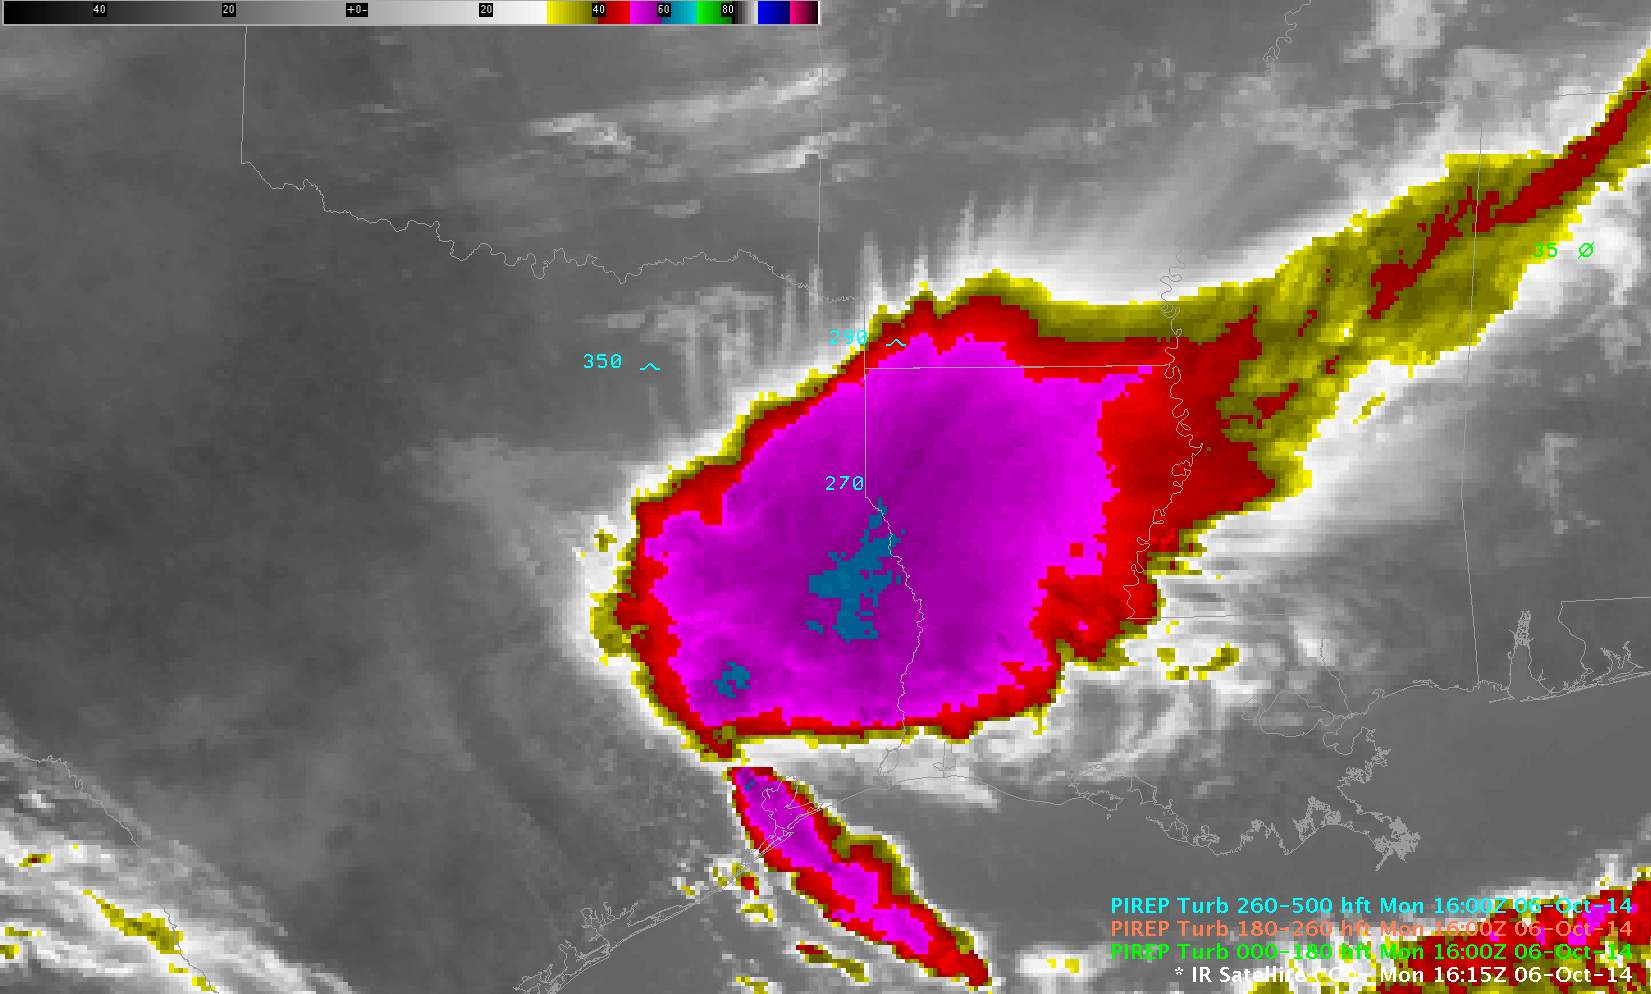 GOES Infrared Imagery(10.7 µm) at 1600 UTC, and Pilot Reports of Turbulence (click to enlarge)